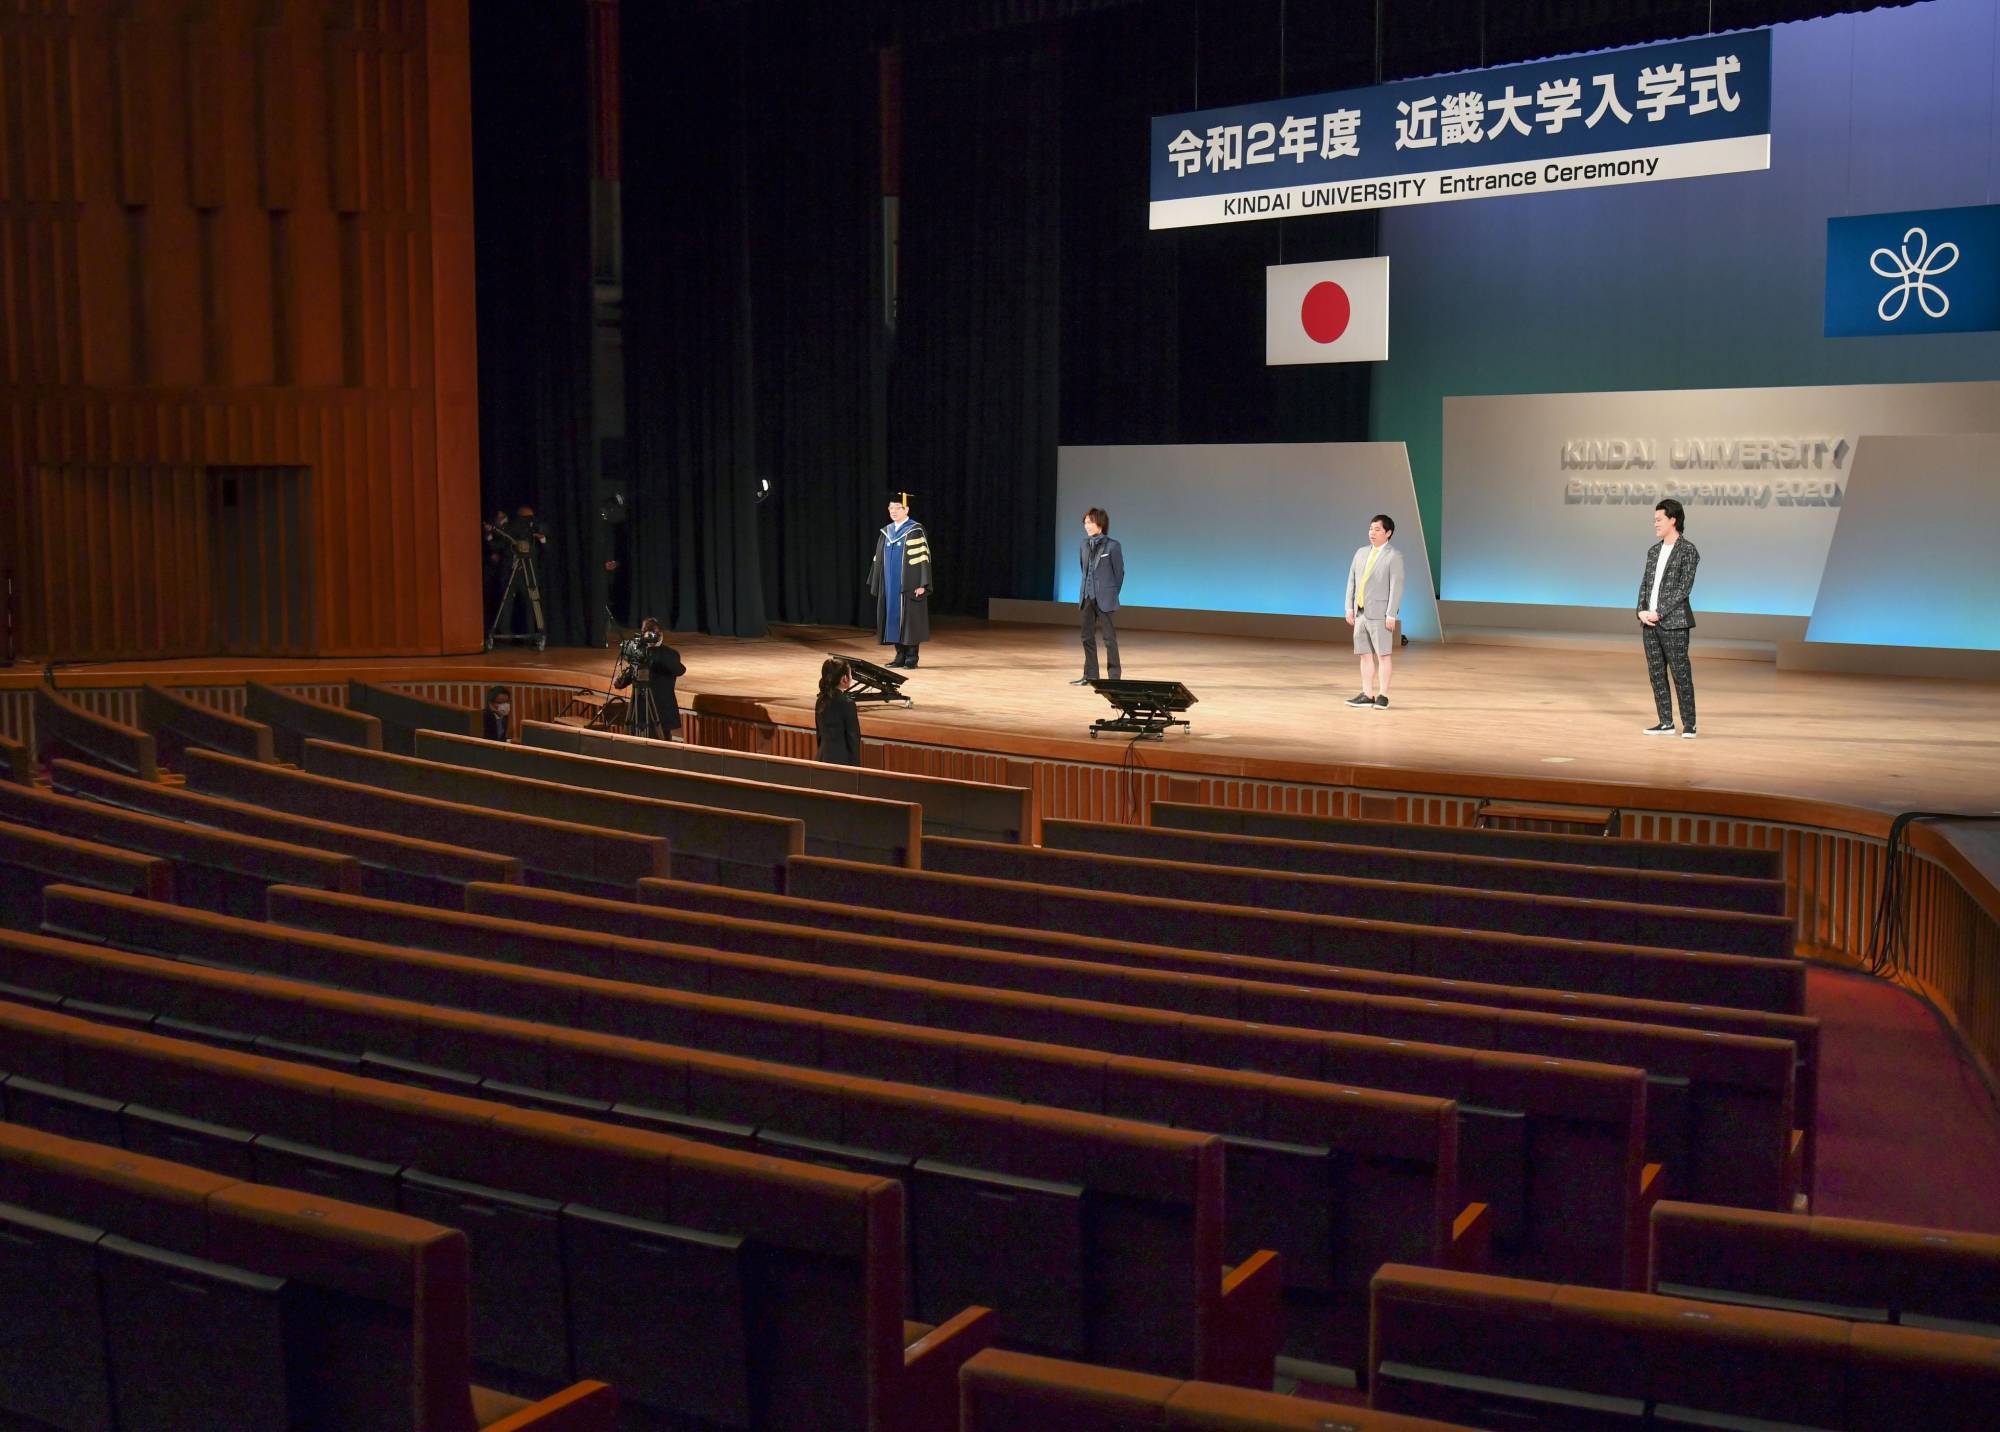 An entrance ceremony for Kindai University is held in Osaka on April 4 with no students present due to the spread of the new coronavirus. The students watched via YouTube. | KYODO